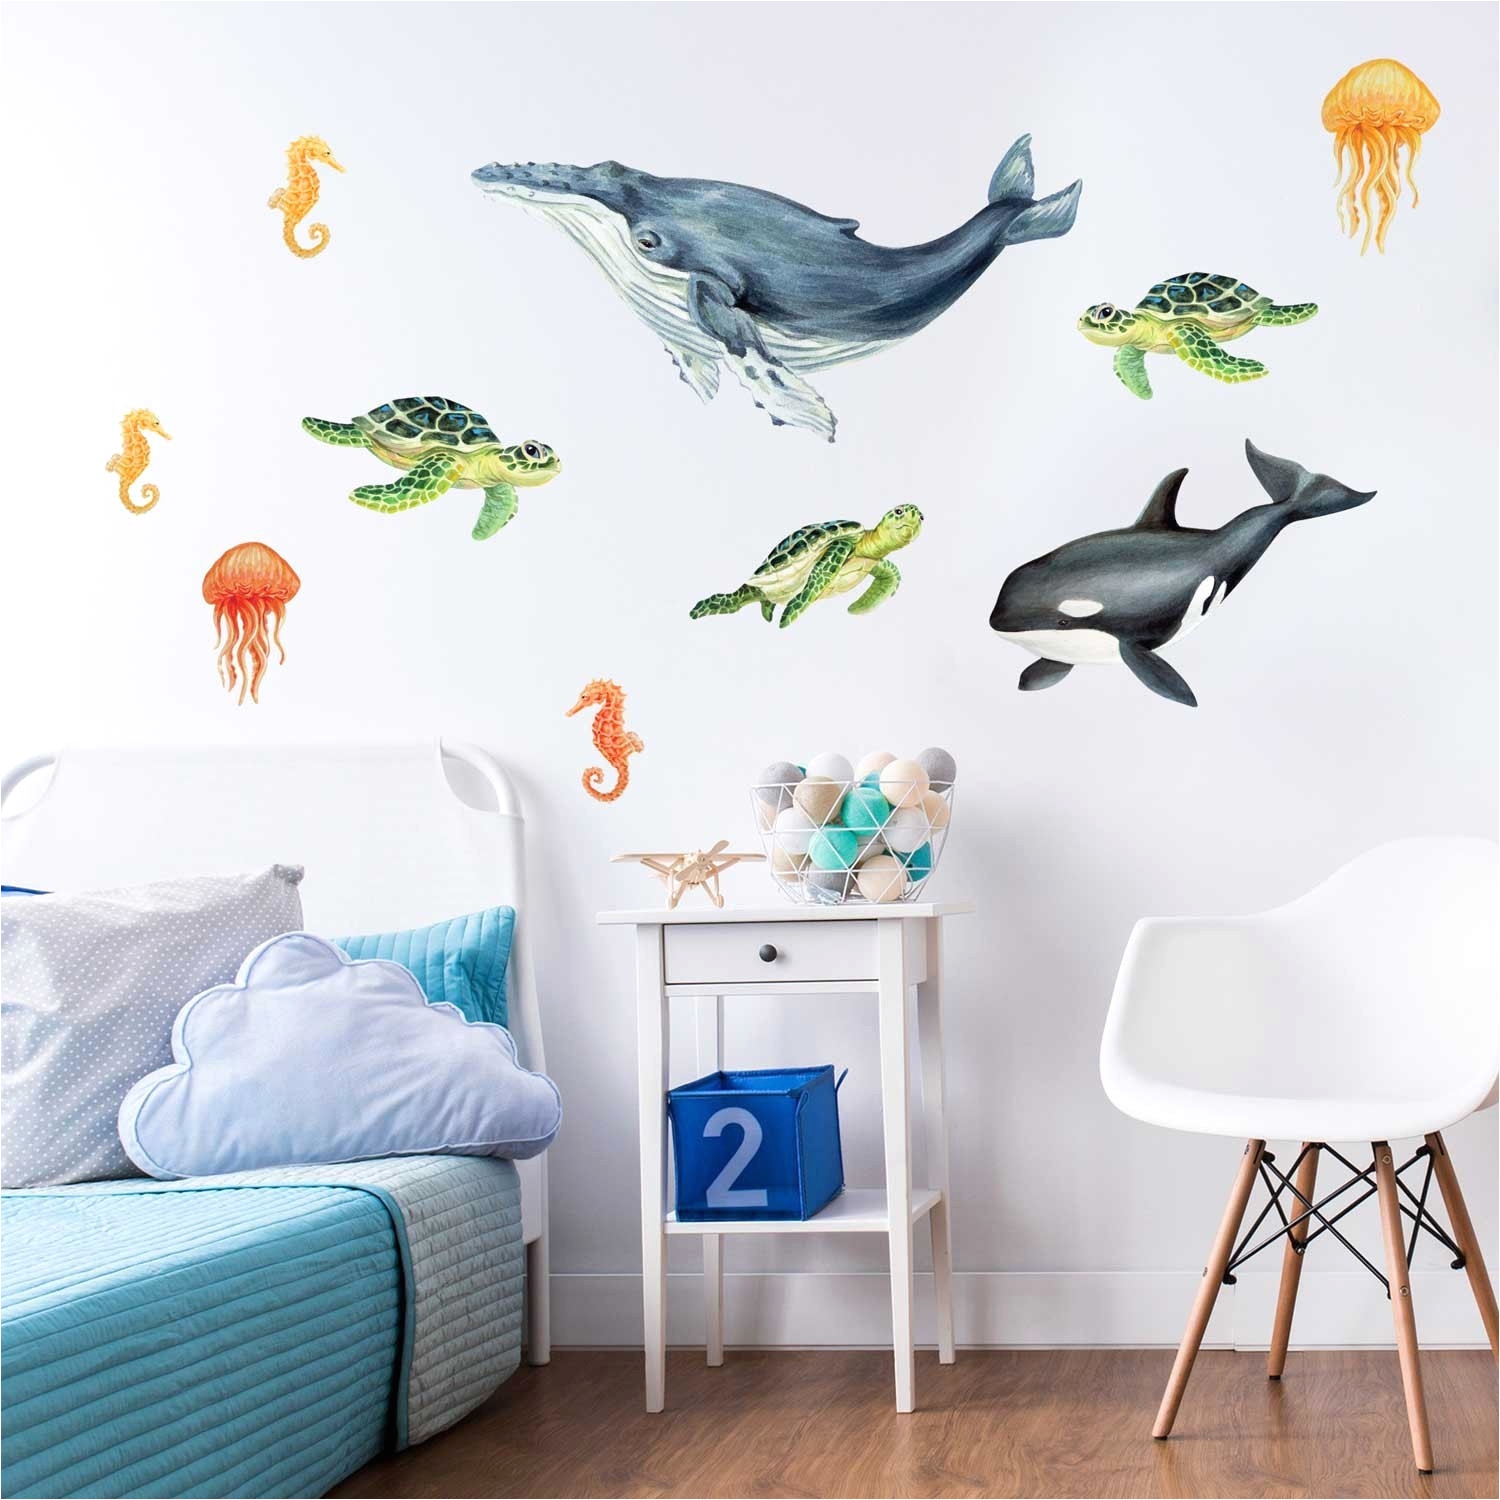 wall decal luxury 1 kirkland wall decor home design 0d outdoor inspiration of sea turtles wall